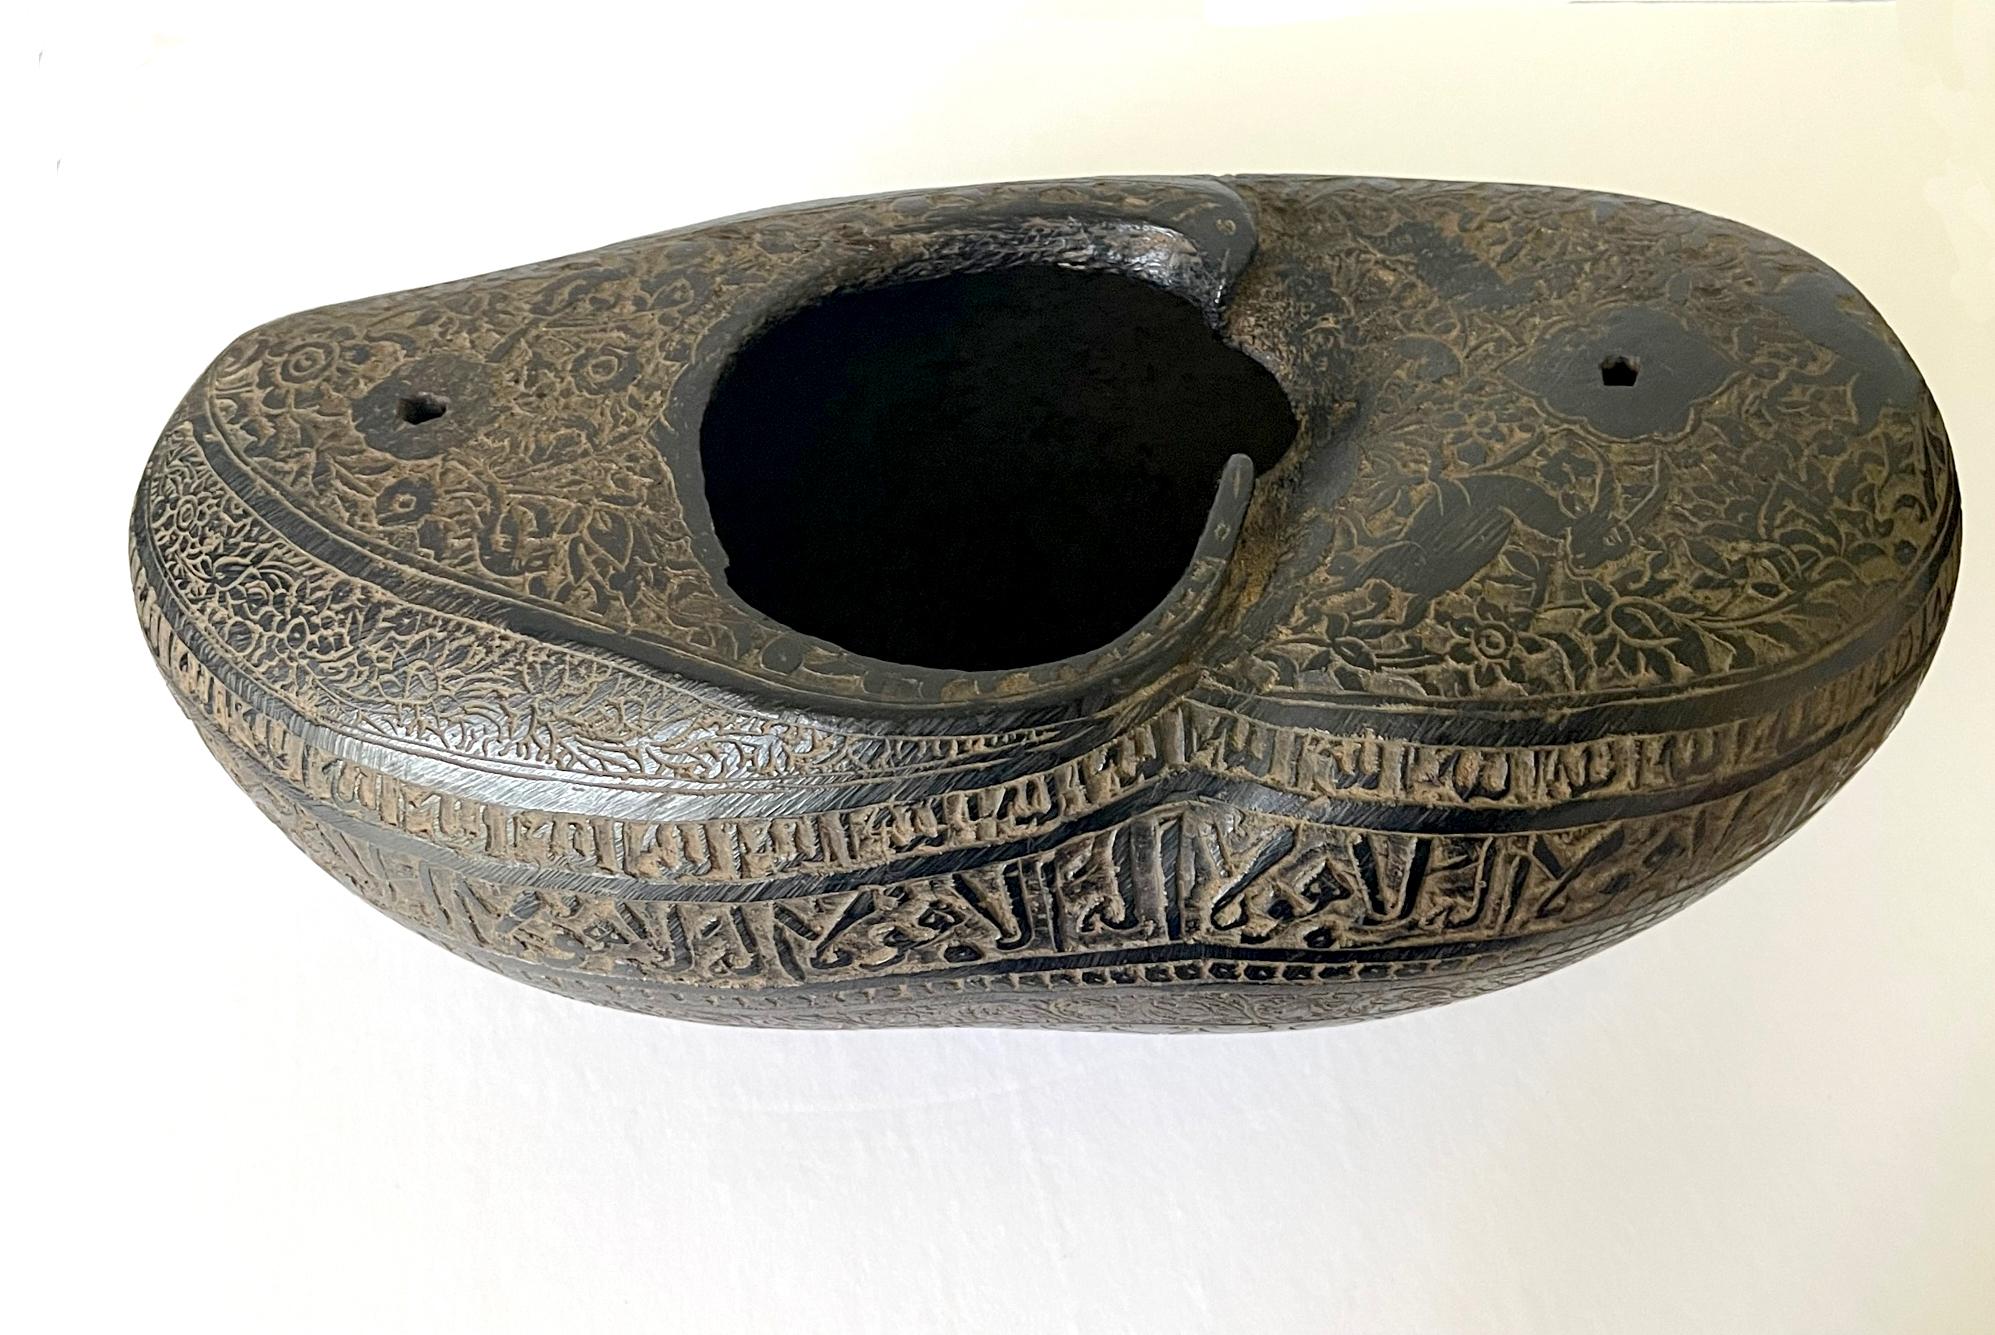 A fine Kashkul carved from half of the giant nutshell of Coco-de-mer likely from Persian Qajar Dynasty circa 18-19th century. Kashkul is a container known as the beggar's bowl, carried by wandering Dervishes, member of the Sufi sect of Islam and